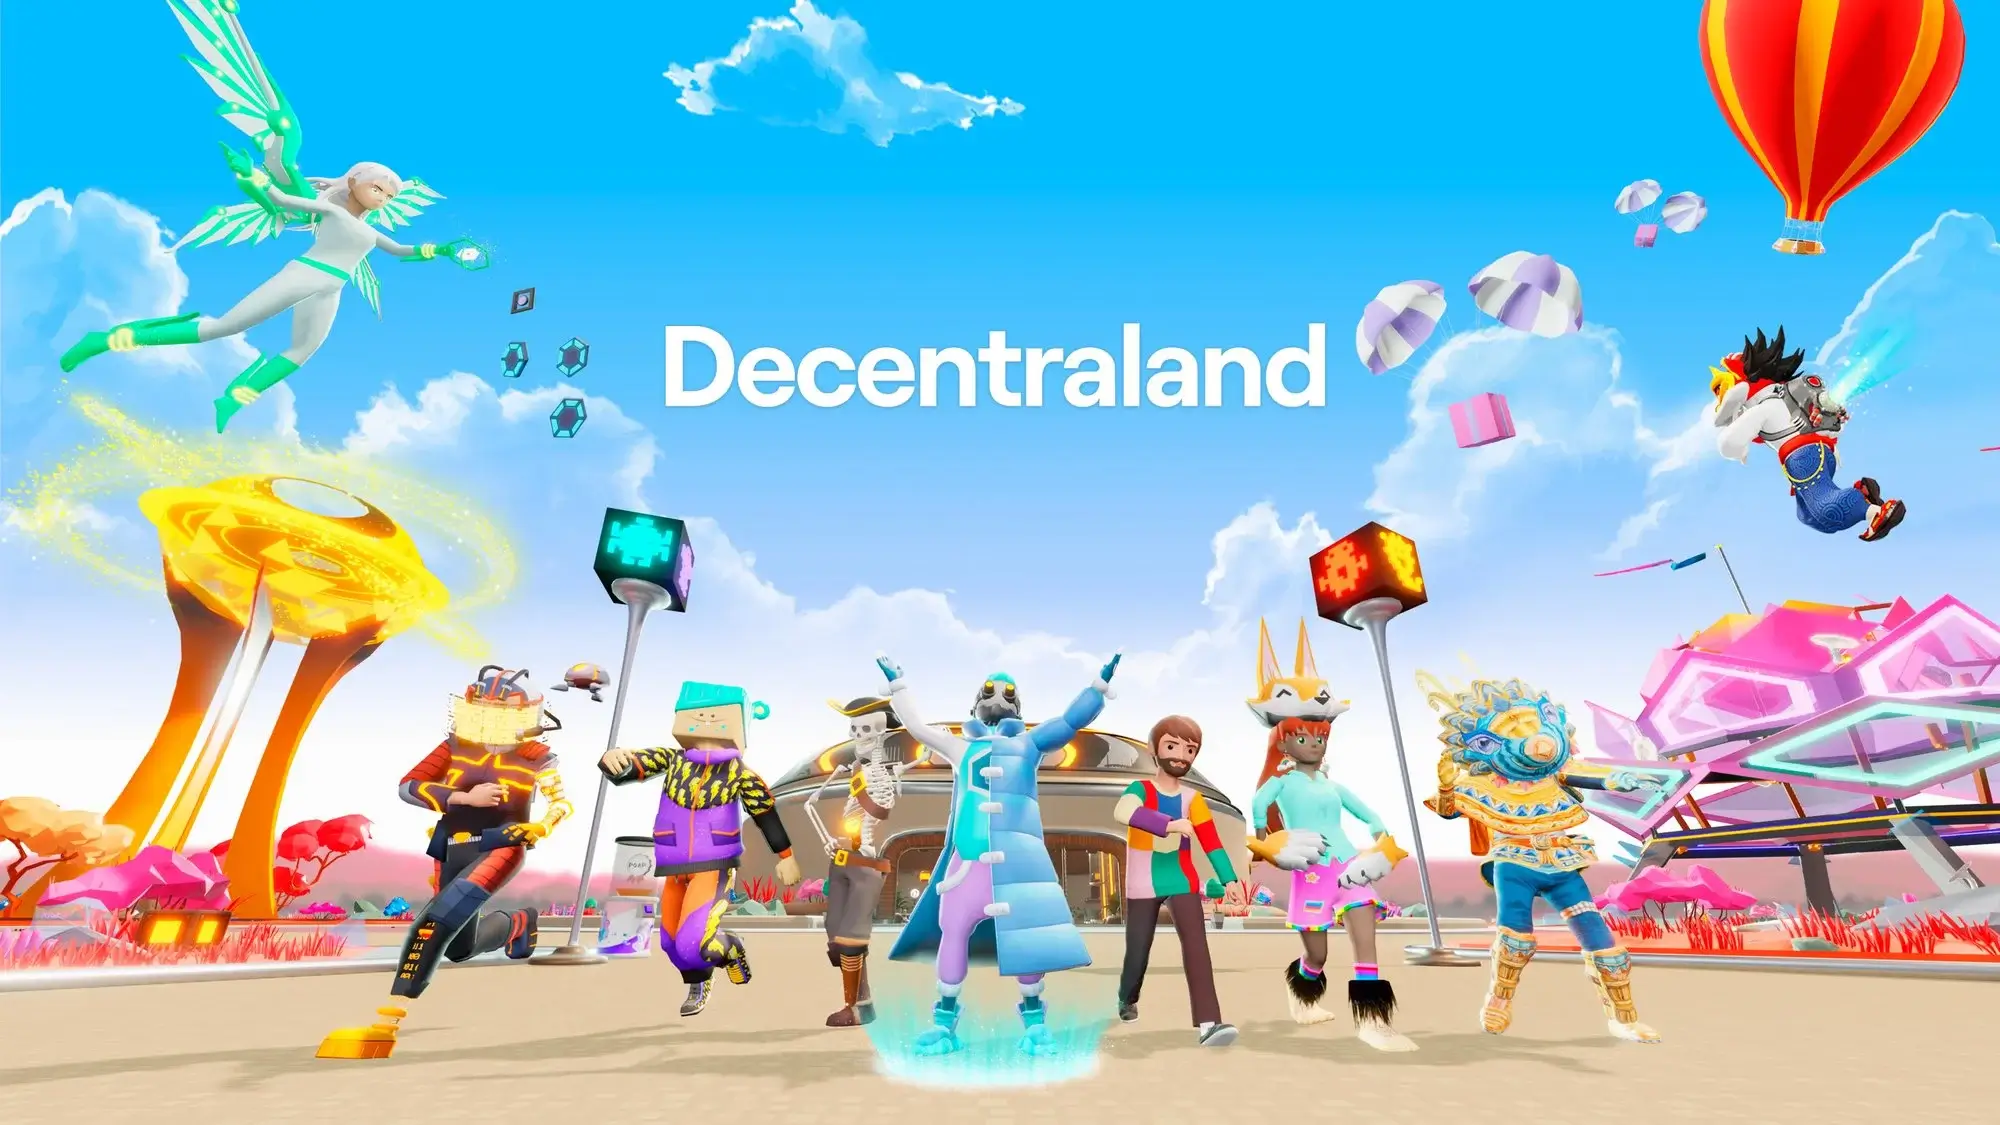 3. Decentraland - Your New and Exciting Digital Realm